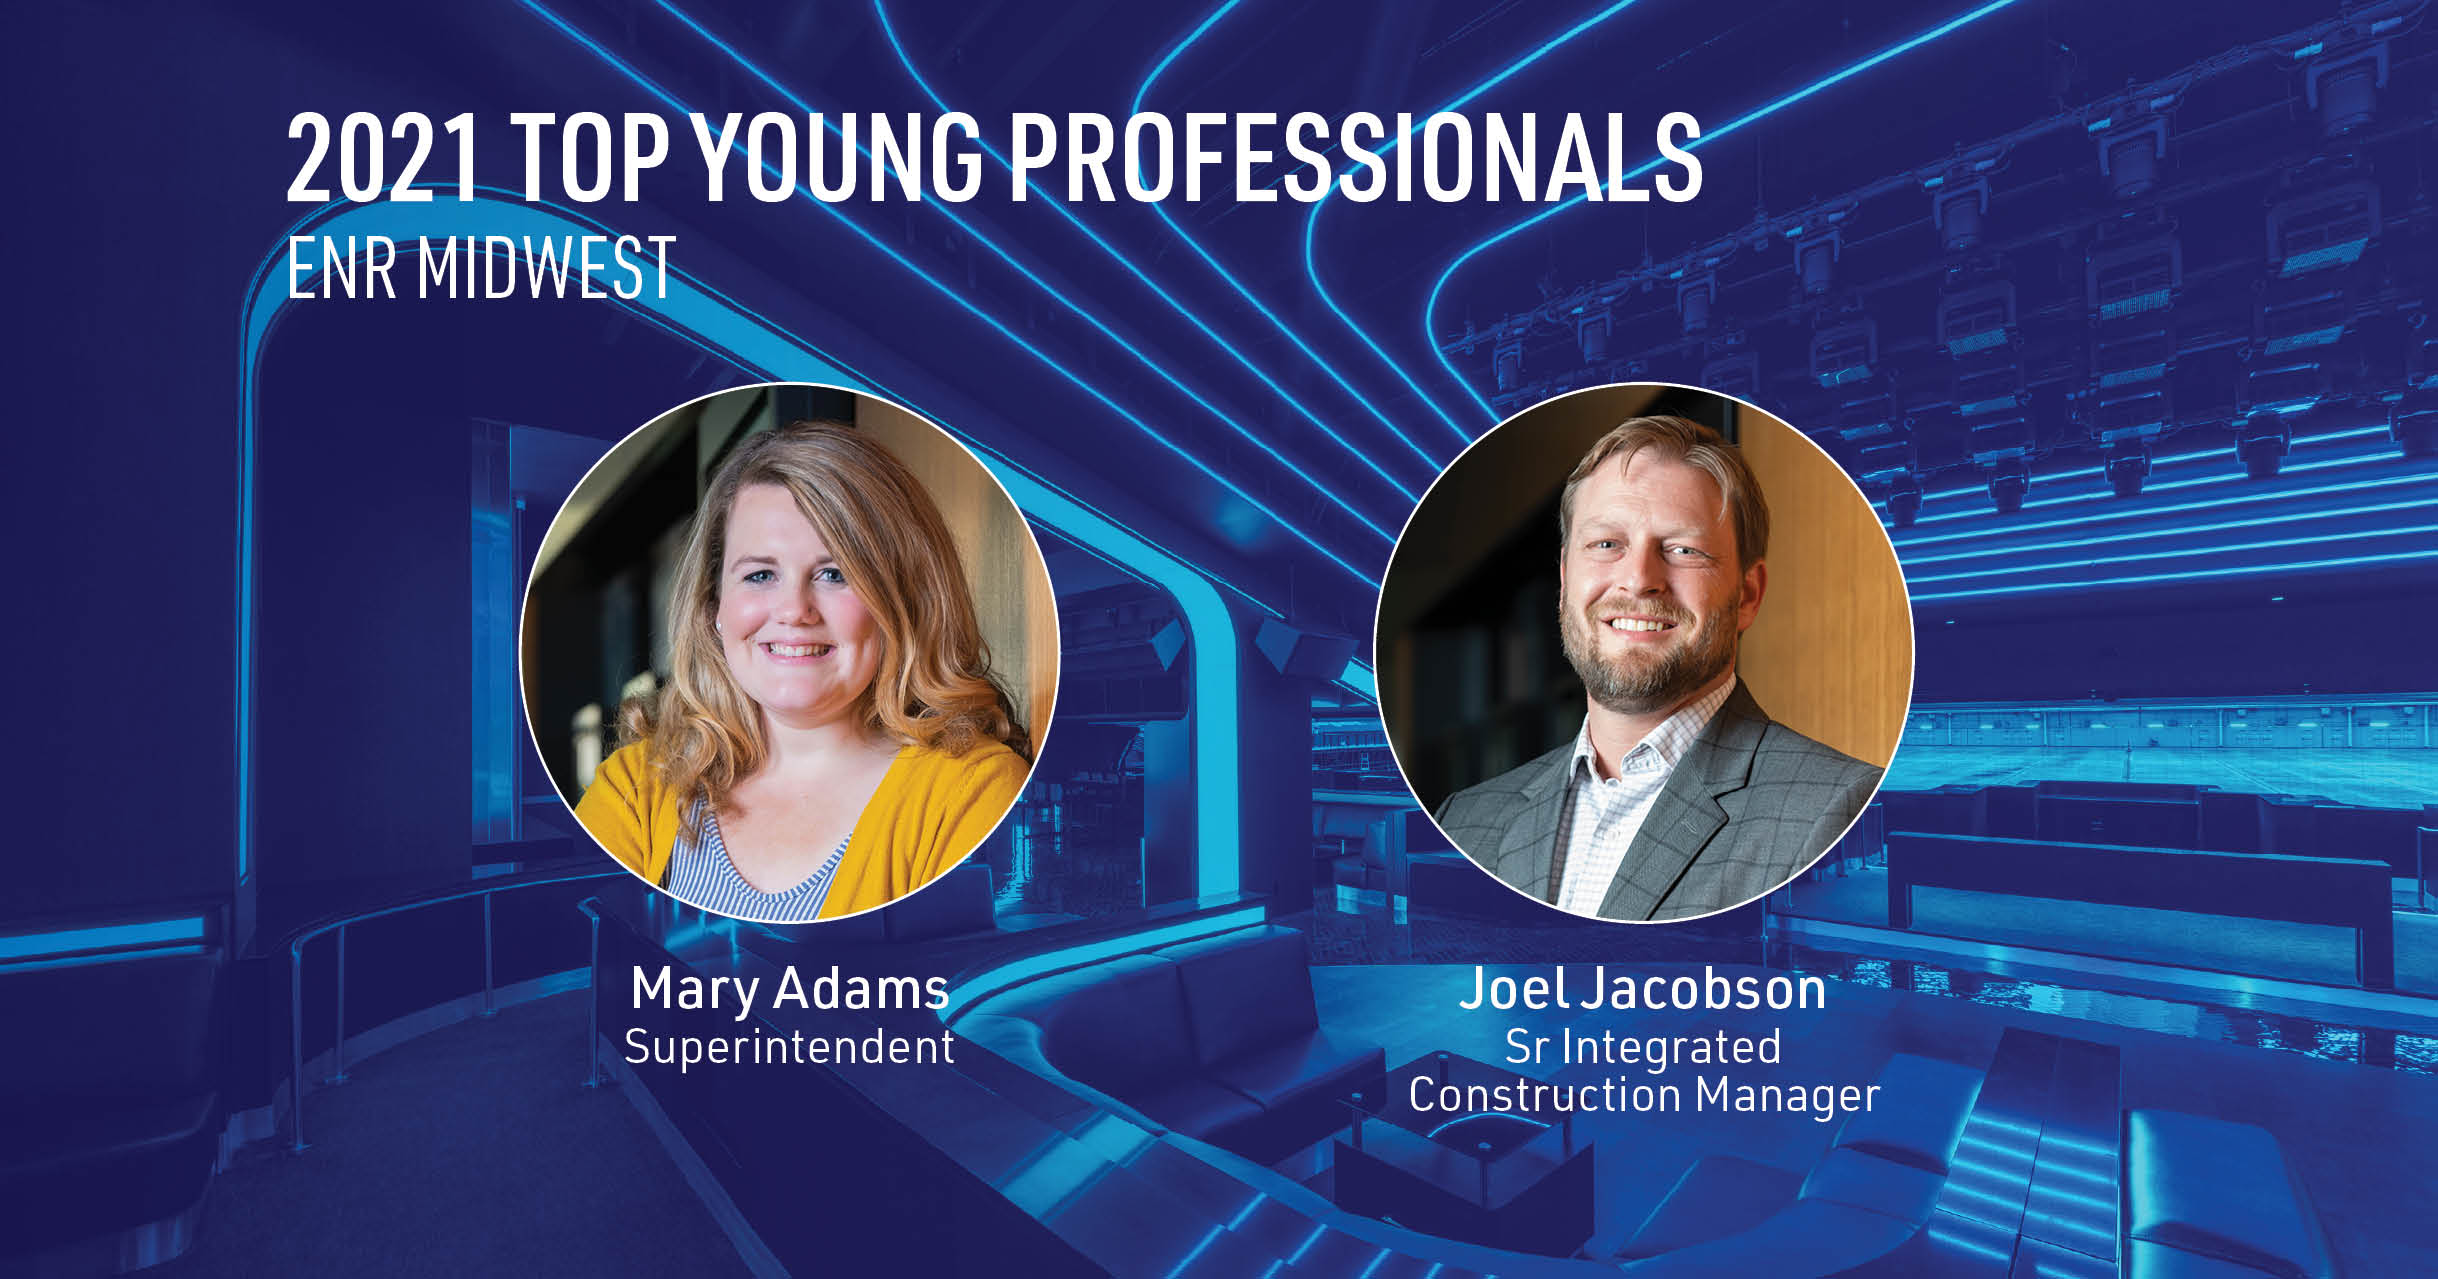 ENR Midwest Top Young Professionals 2021